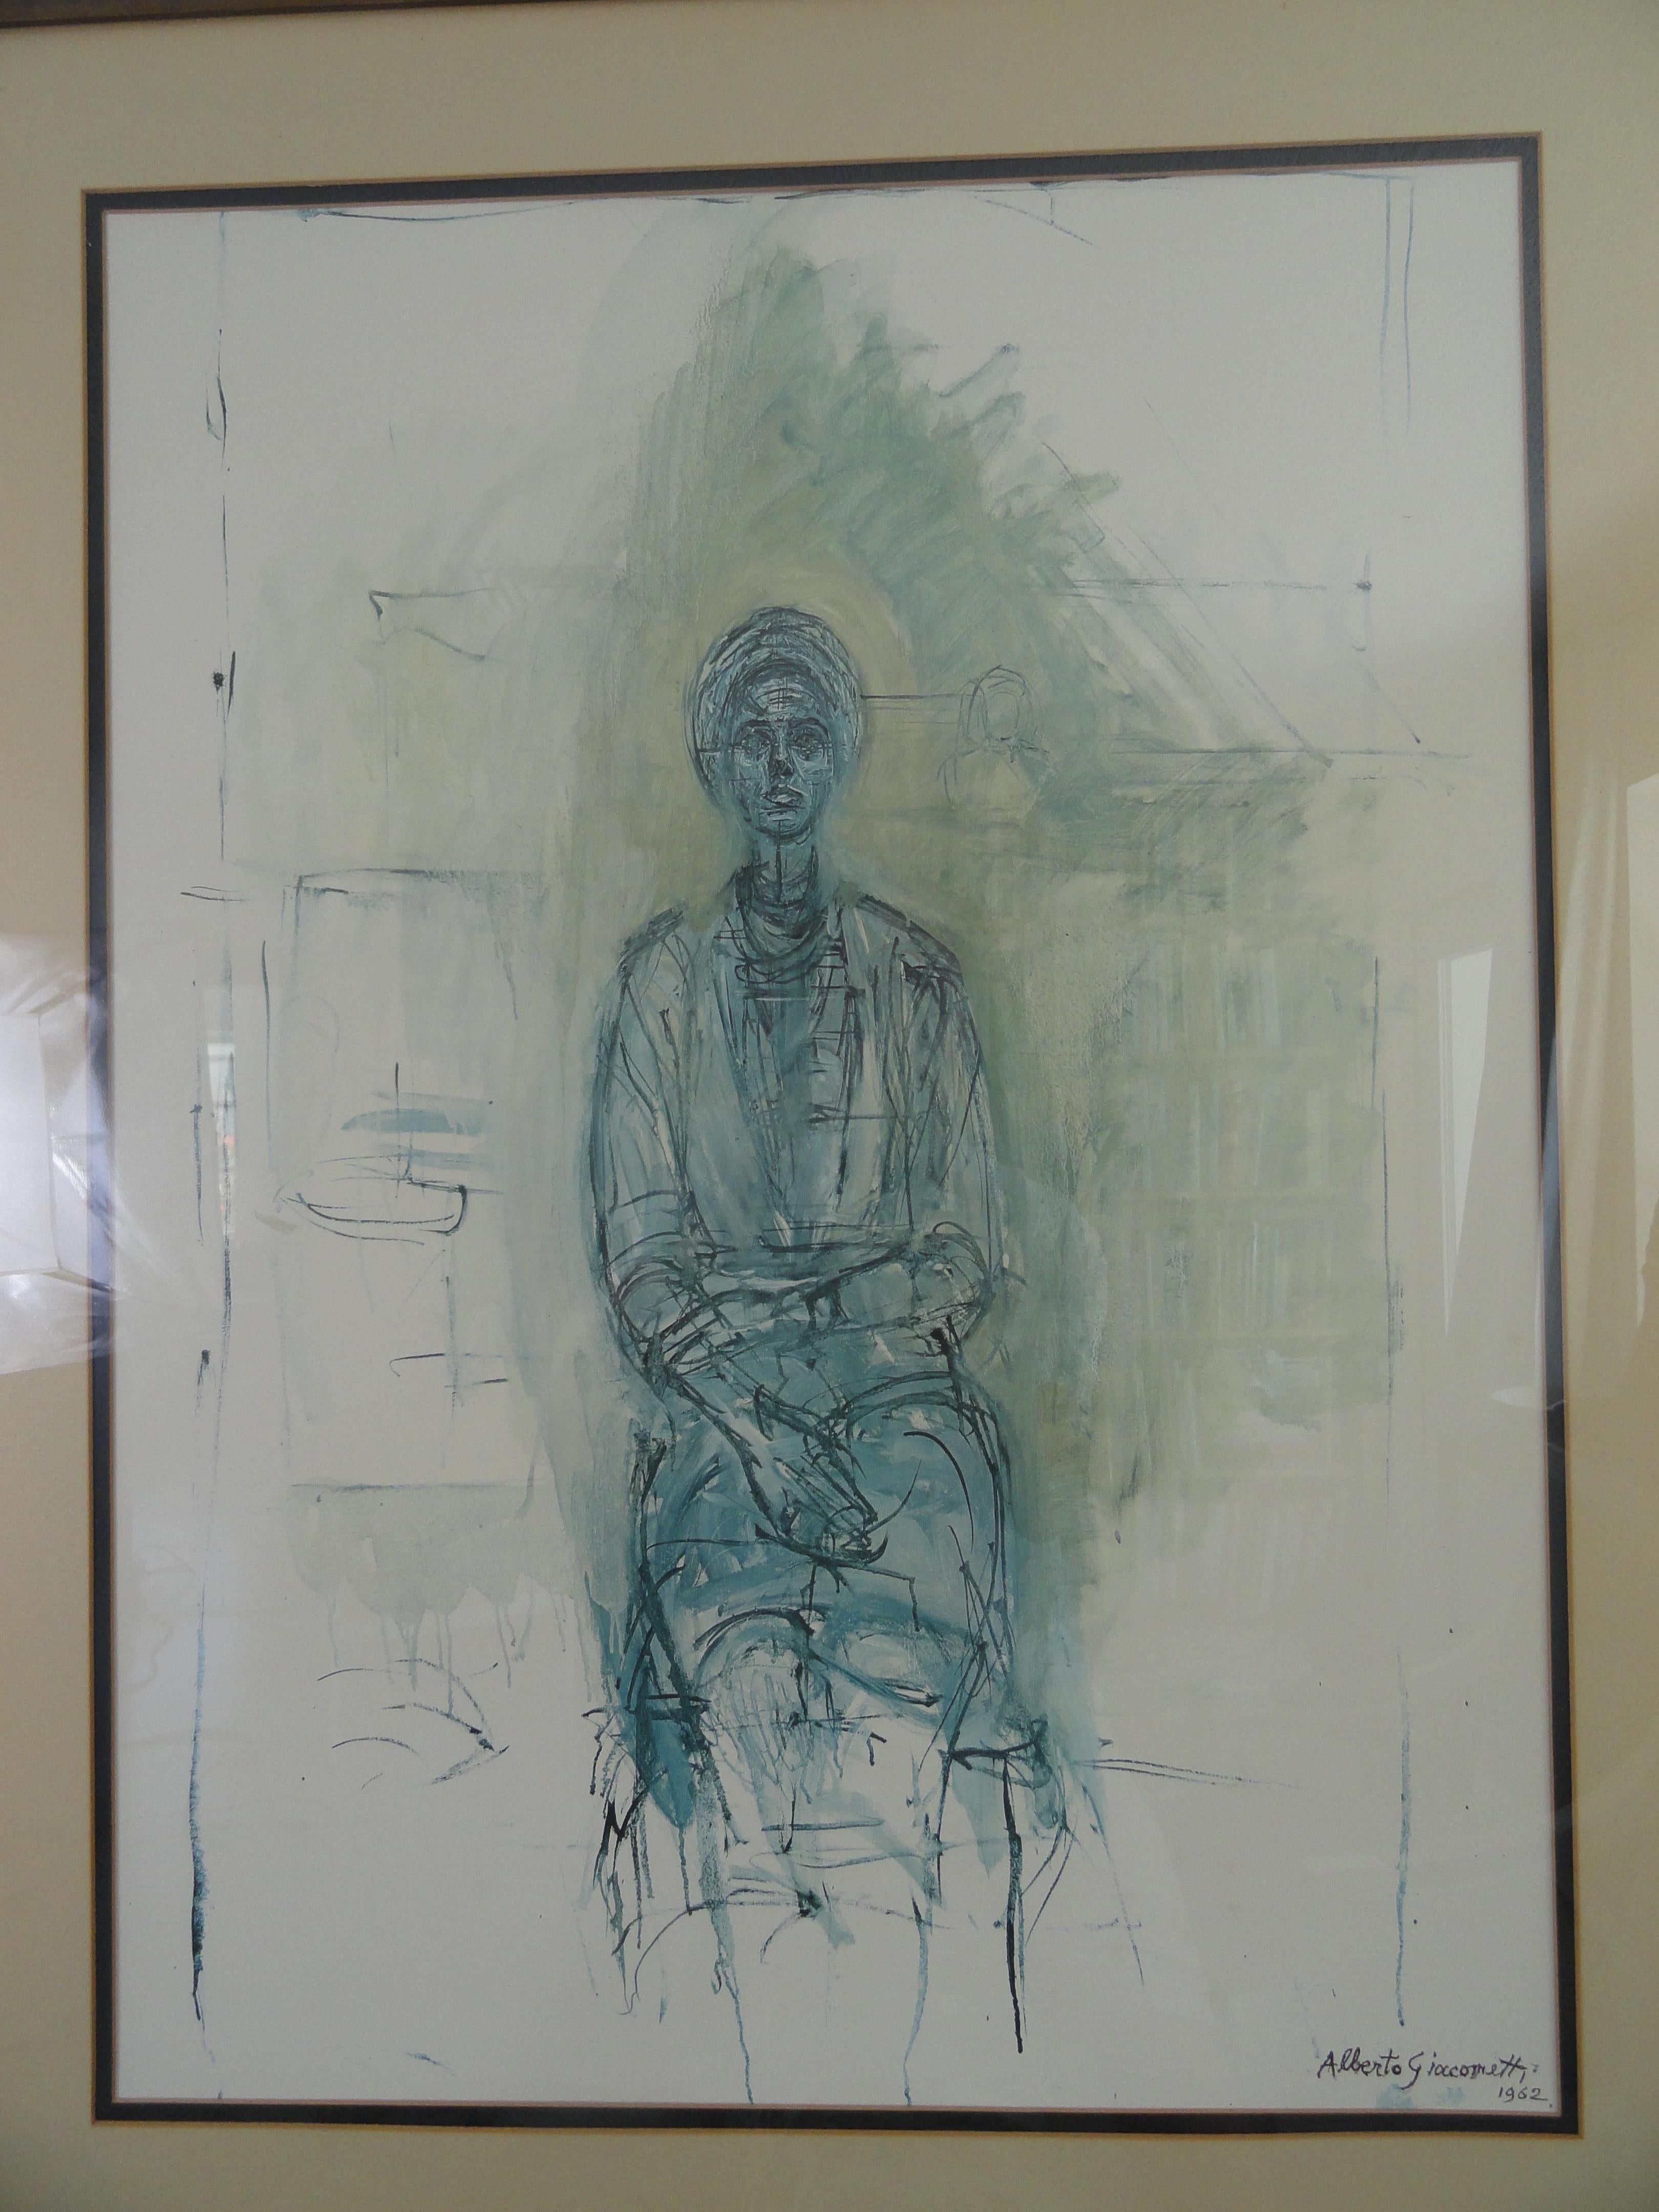 Alberto Giacometti (1910-1966) lithograph. Published by the Maeght Gallery, 1962.